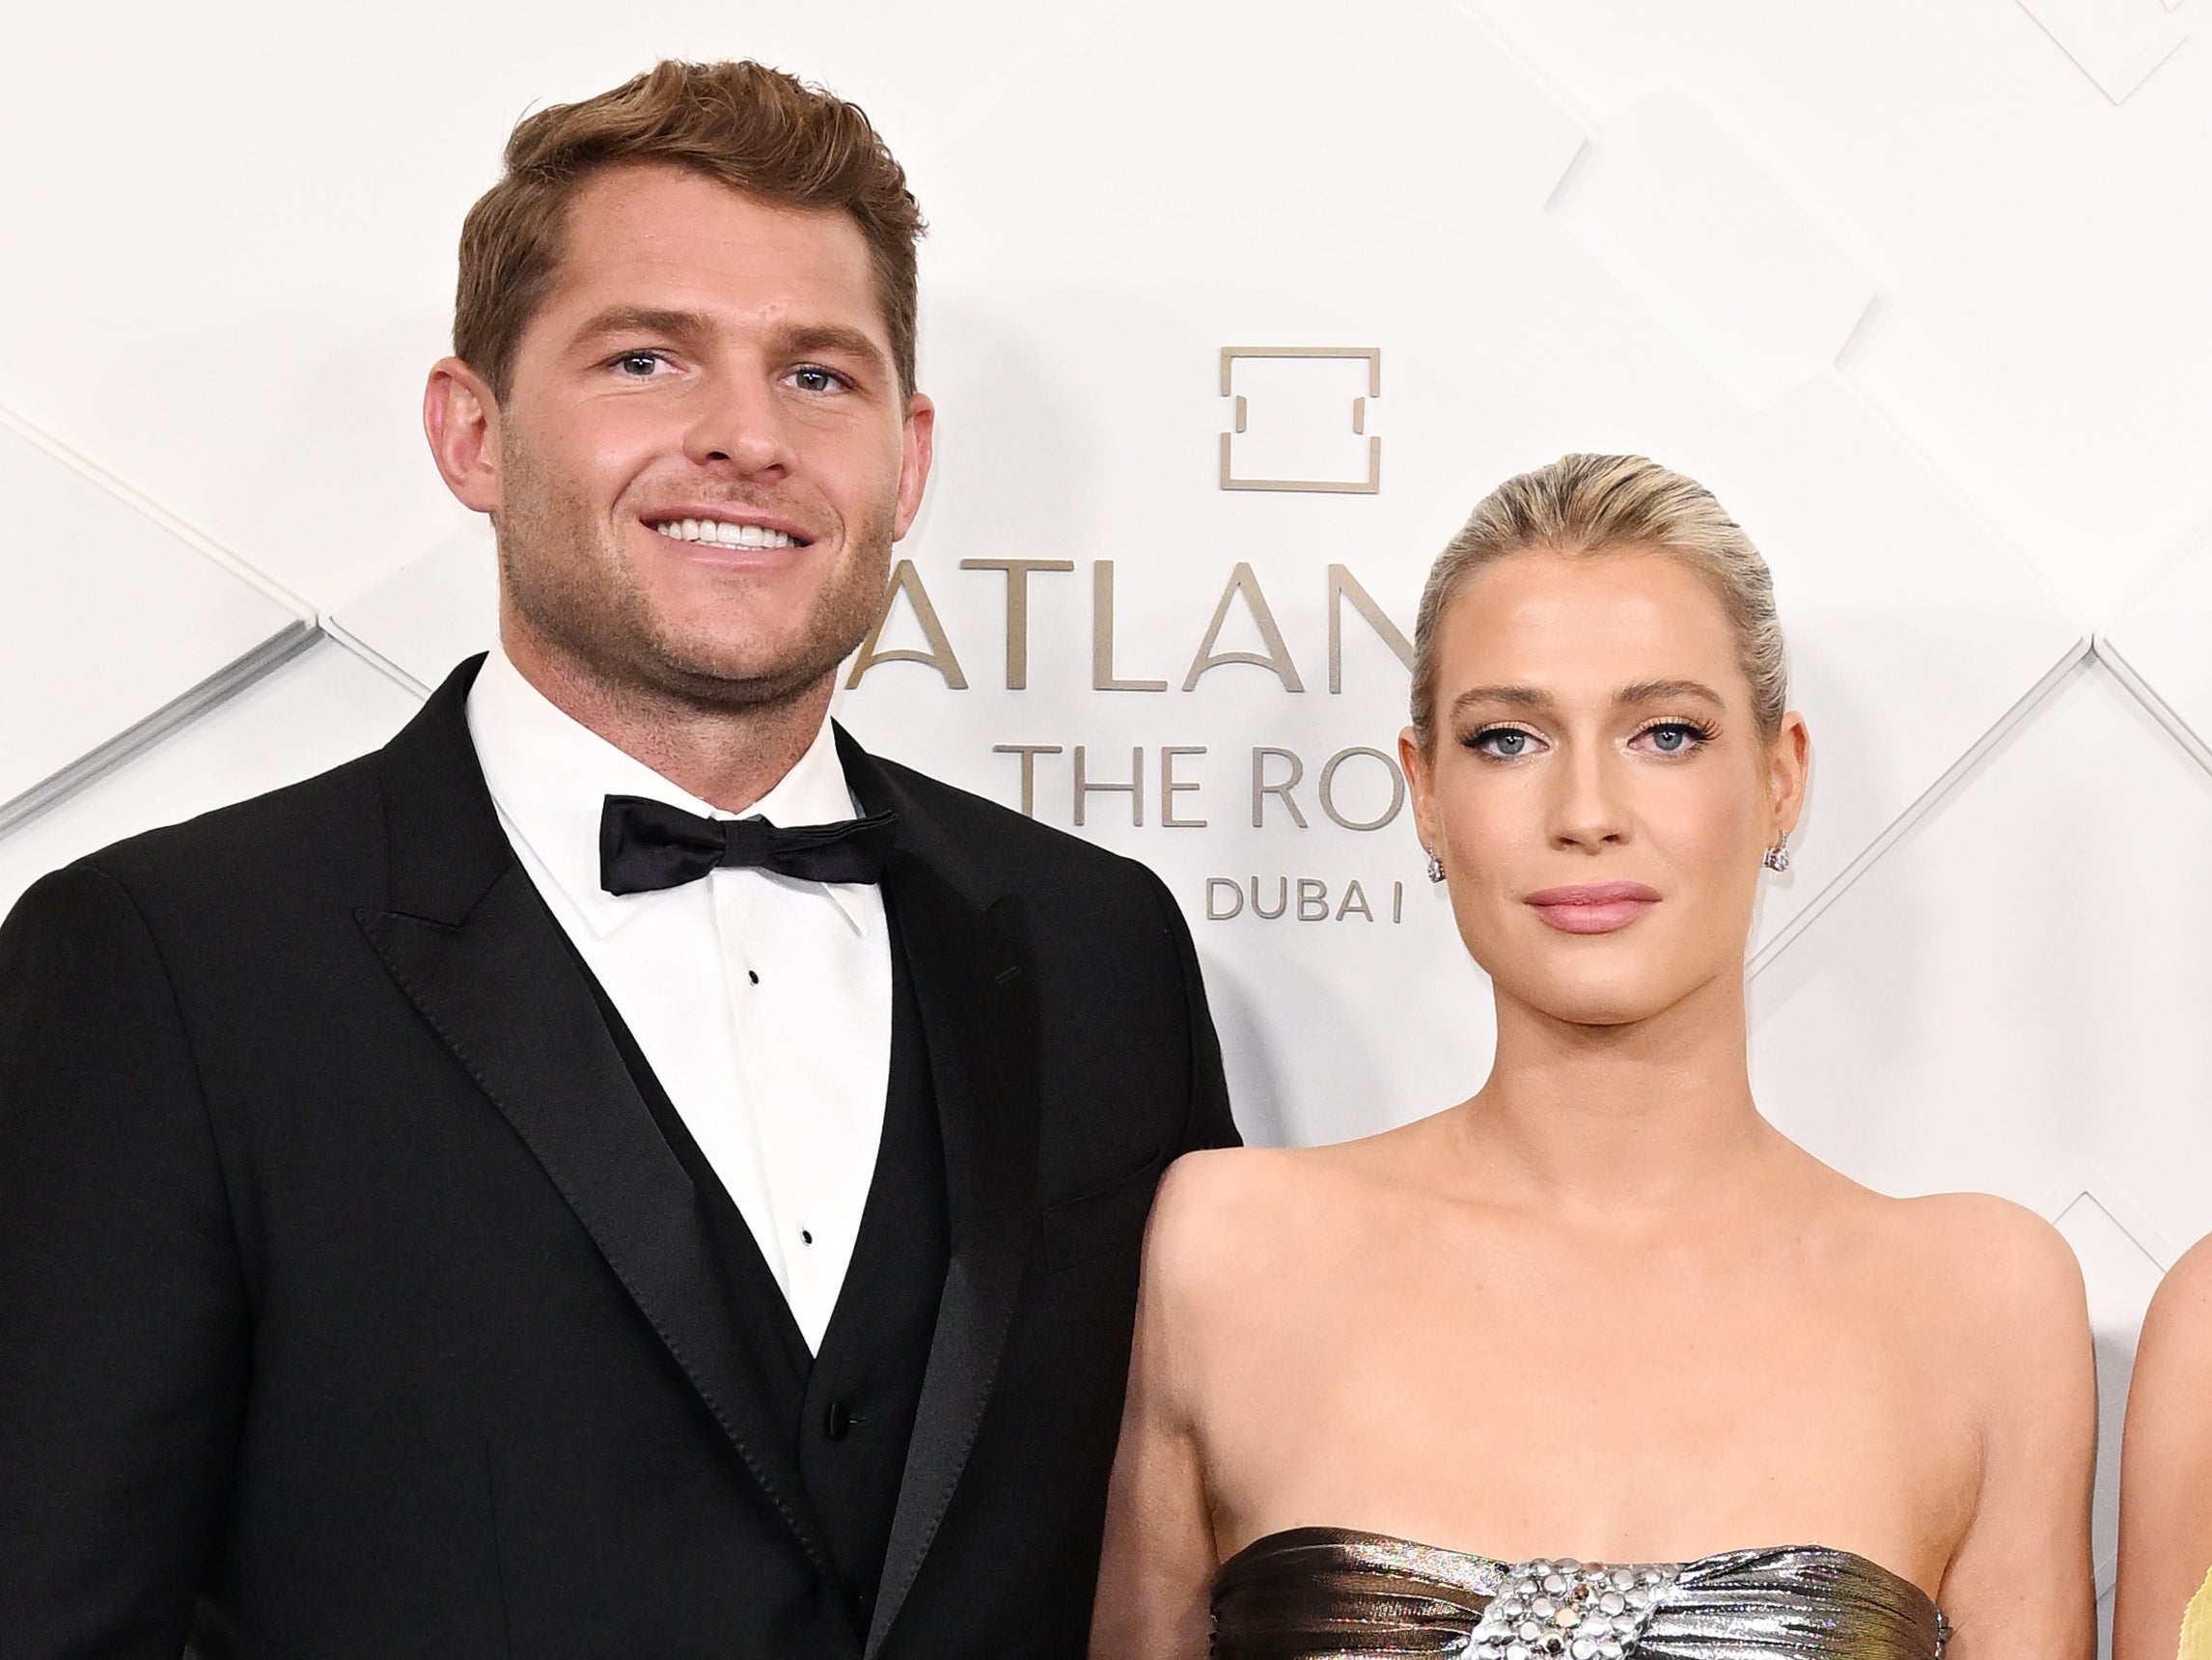 Greg Mallett and Lady Amelia Spencer attend the Grand Reveal Weekend for Atlantis The Royal, Dubai's new ultra-luxury hotel on January 21, 2023 in Dubai